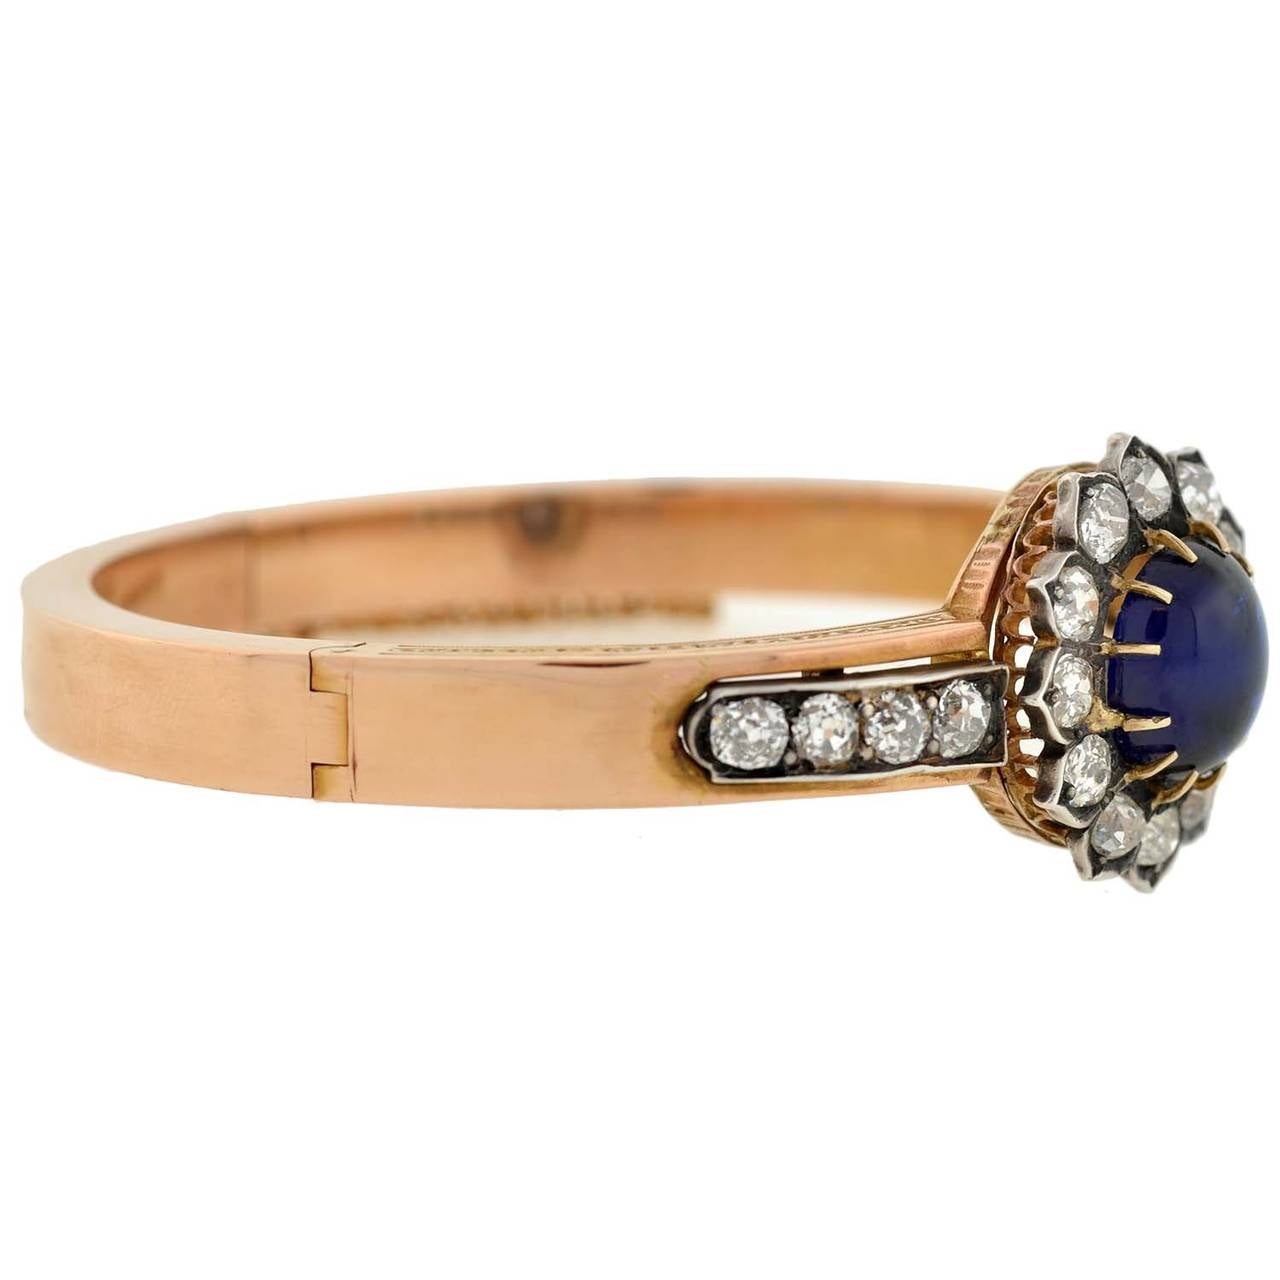 A spectacular sapphire and diamond bracelet from the Victorian era (ca1880)! Made of vibrant 18kt yellow gold, the bracelet is a hinged bangle style with a stunning gemstone-encrusted face. Resting at the center is a magnificent cabochon sapphire